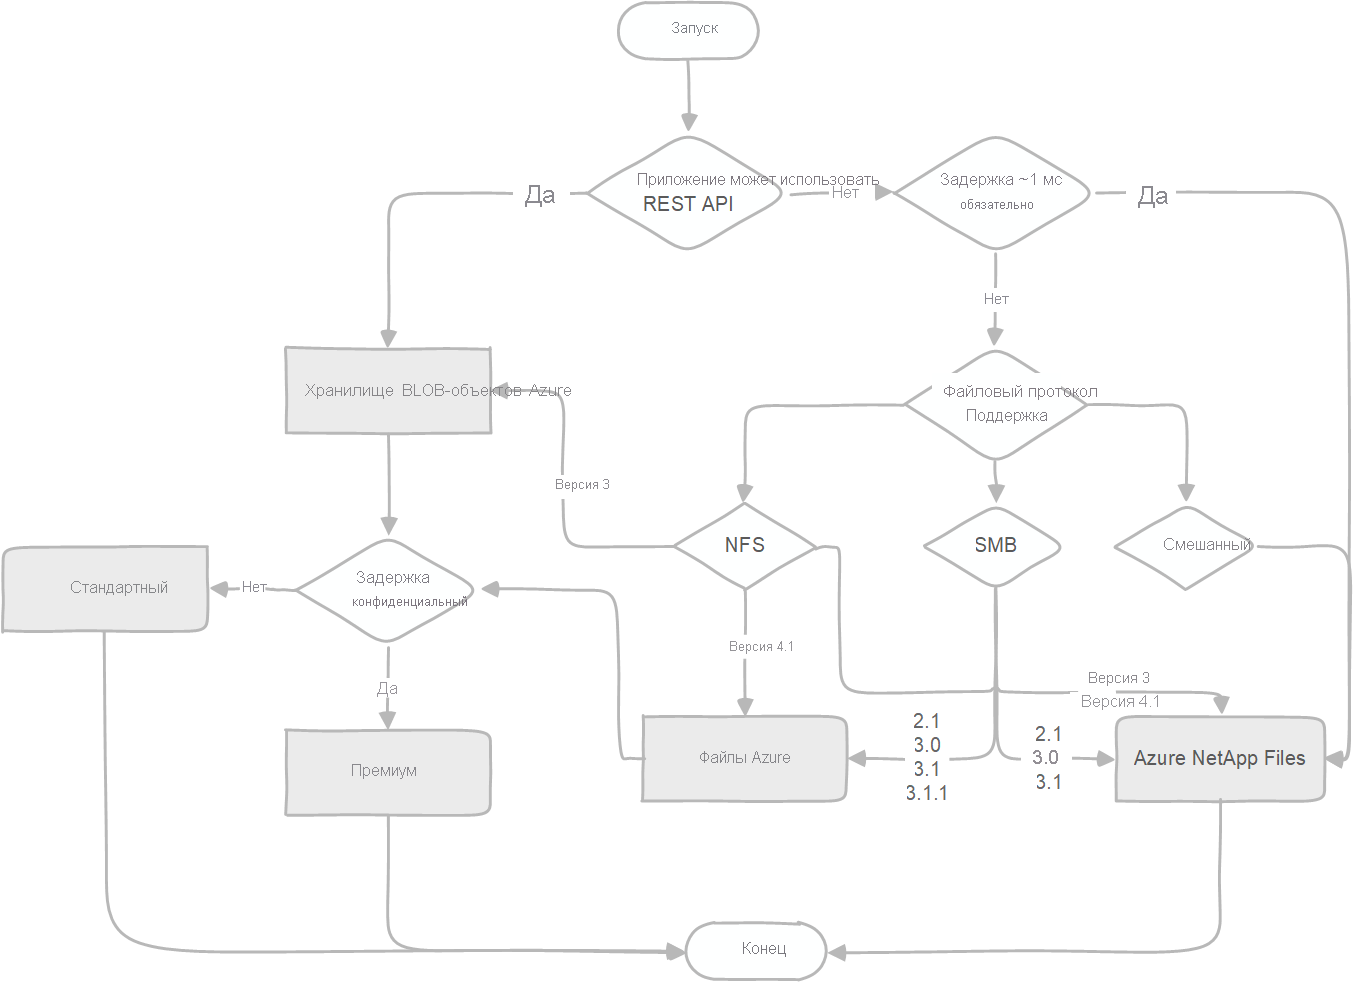 Basic decision tree on choosing the correct file service